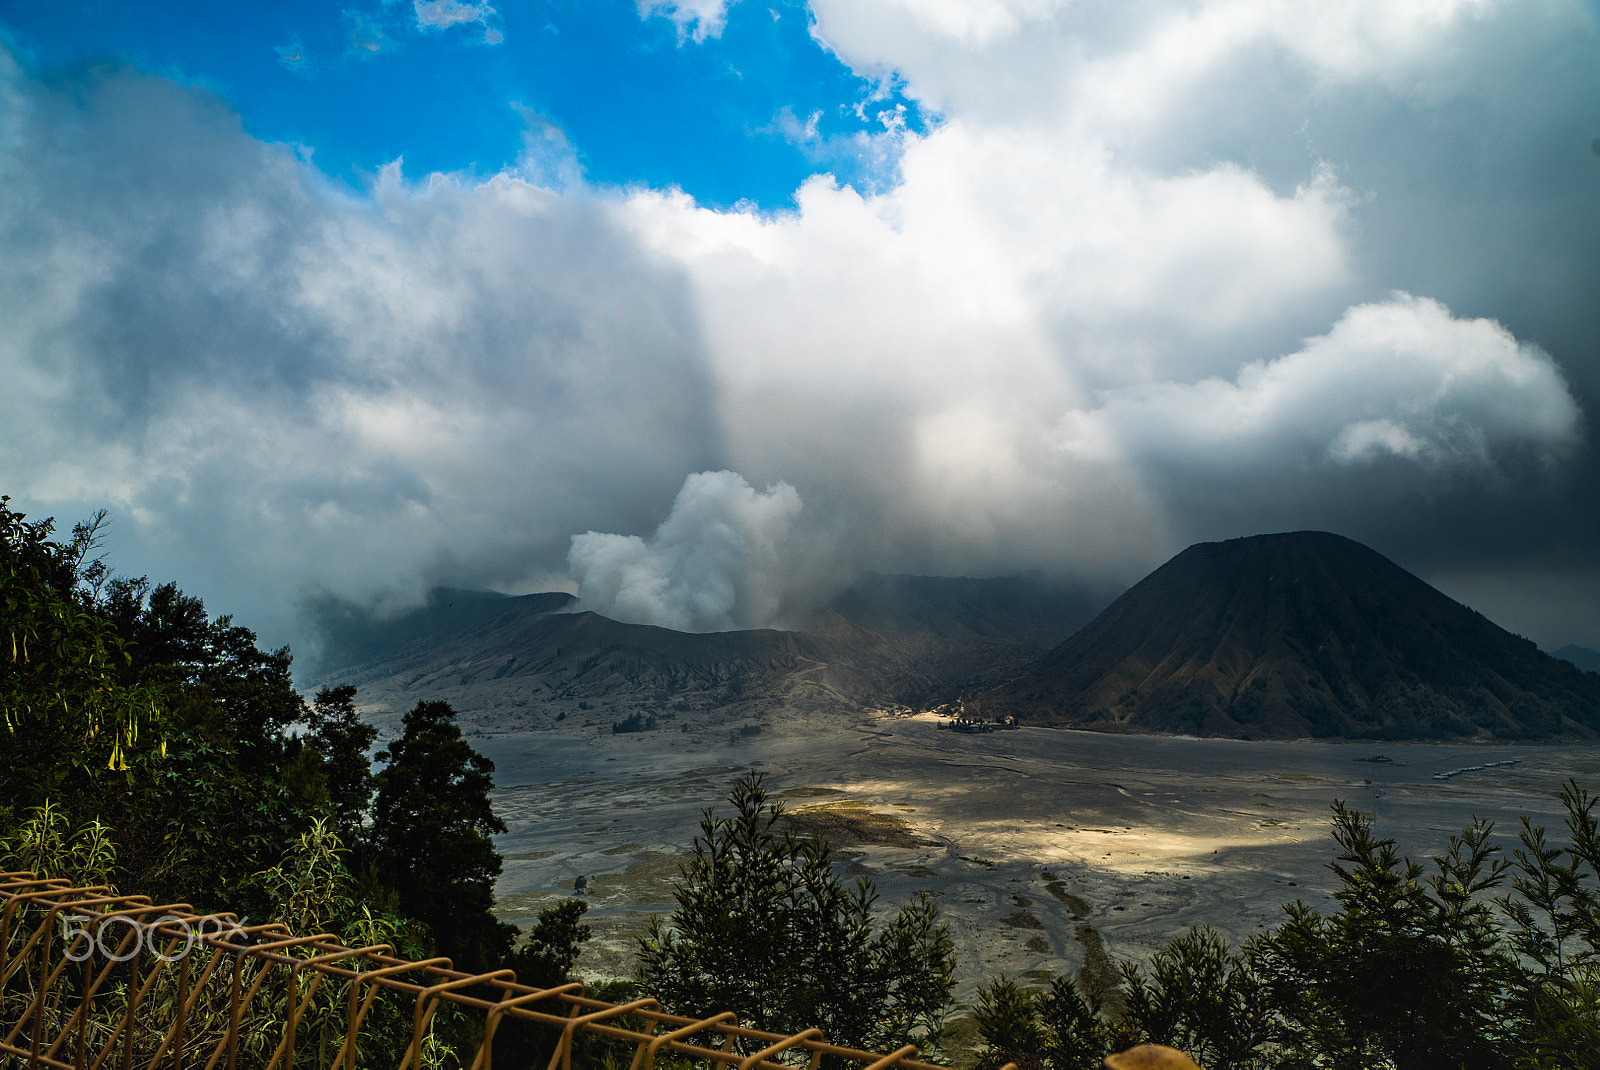 Sony a7S sample photo. Light beam at front of mount bromo photography